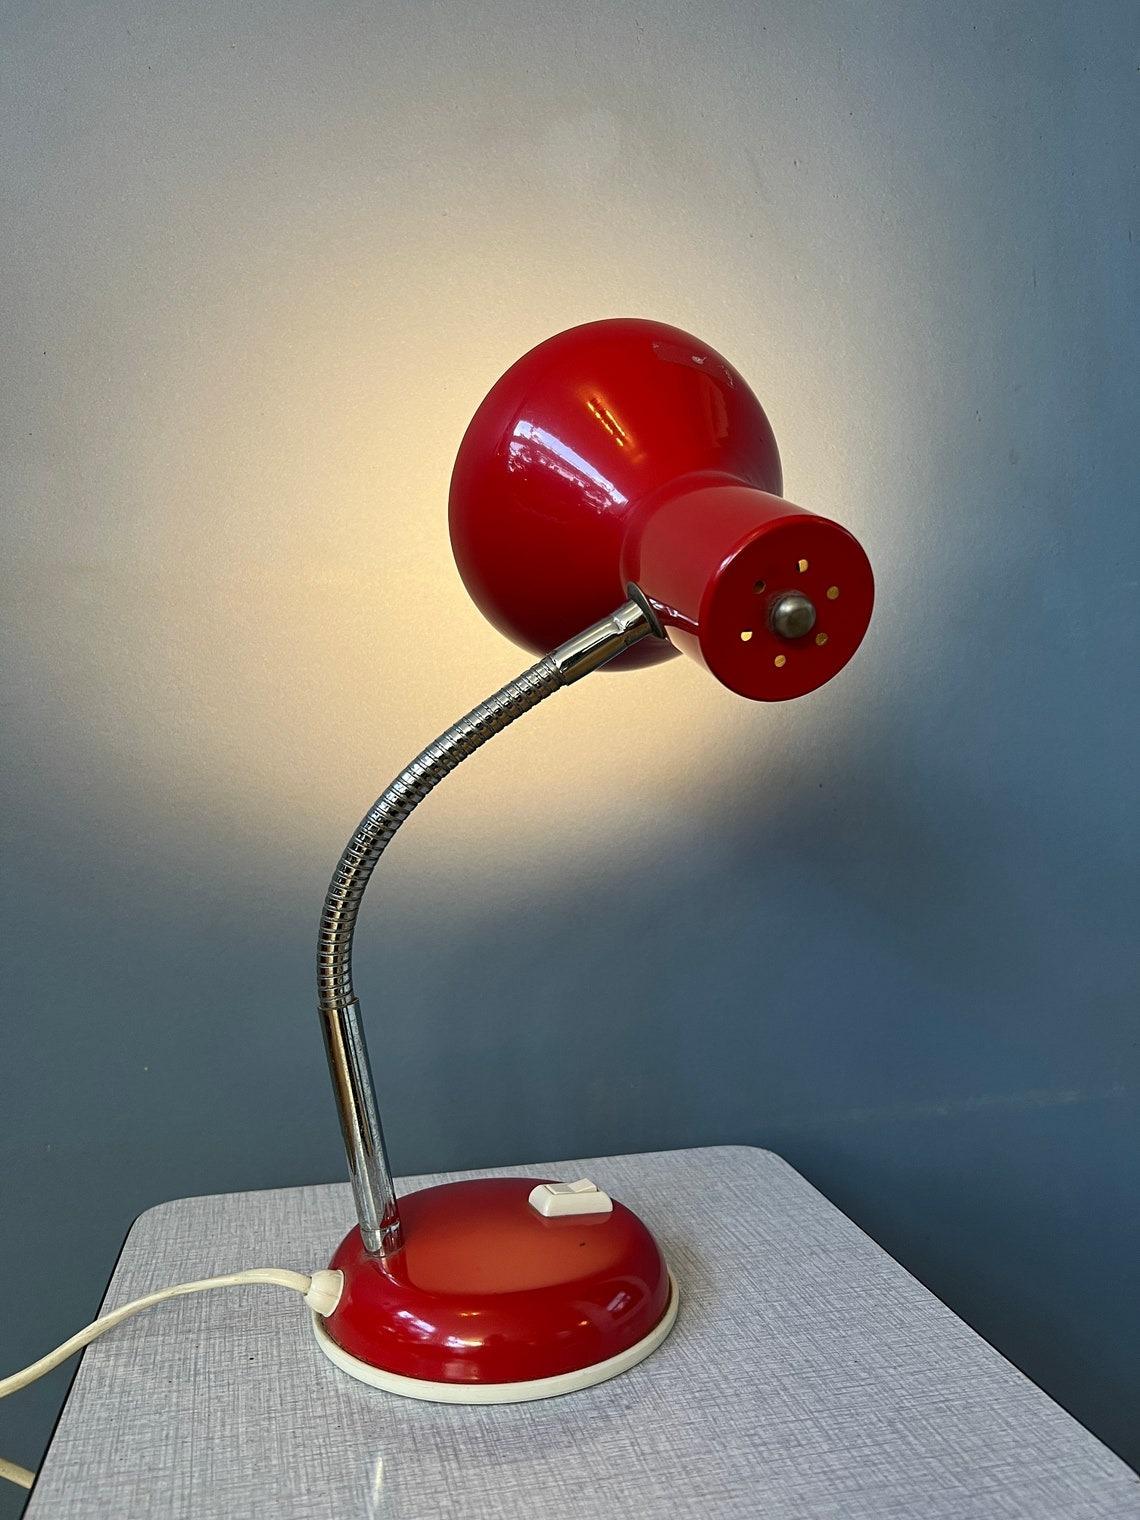 Vintage small space age table lamp in red colour with flexible arm. The arm and shade can be positioned in any way desirable. The lamp is made out of metal. The lamp requires one E27/26 (standard) lightbulb and currently has an EU plug.

Additional